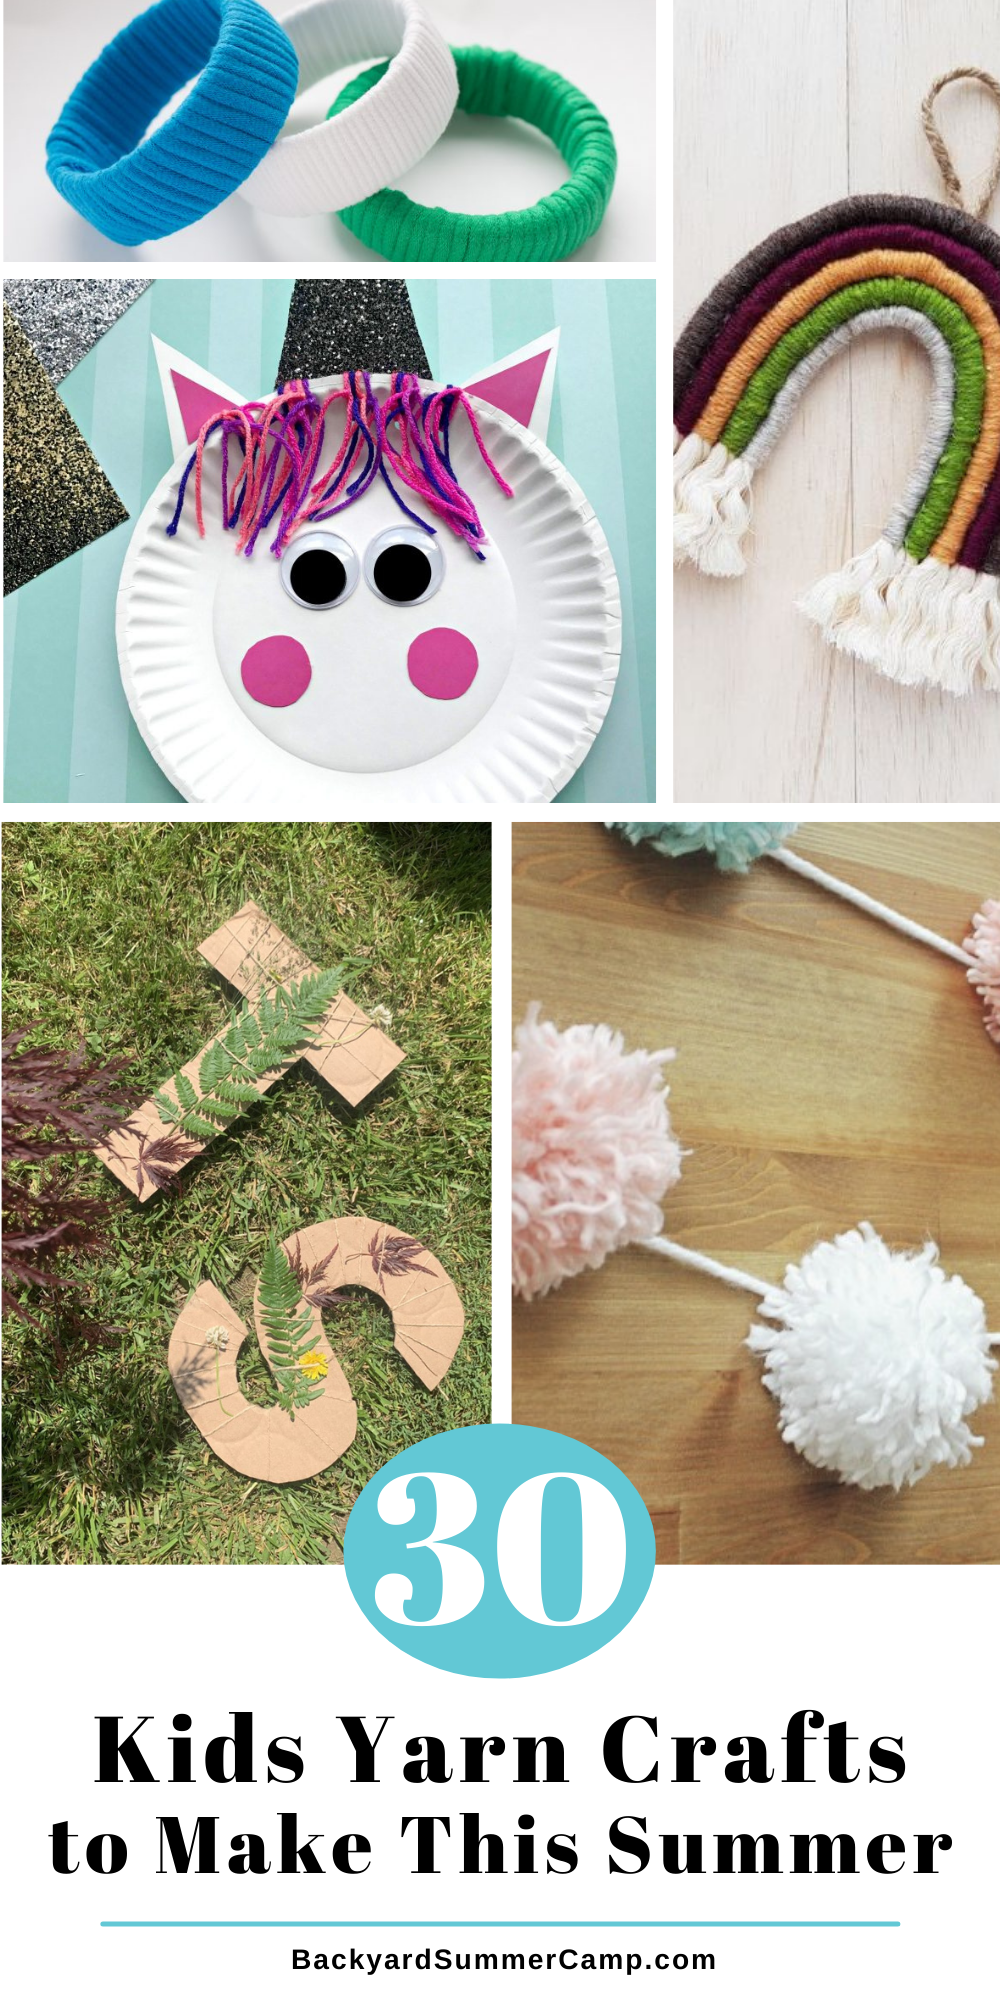 Paper Plate Unicorn Craft for Preschool - Red Ted Art - Kids